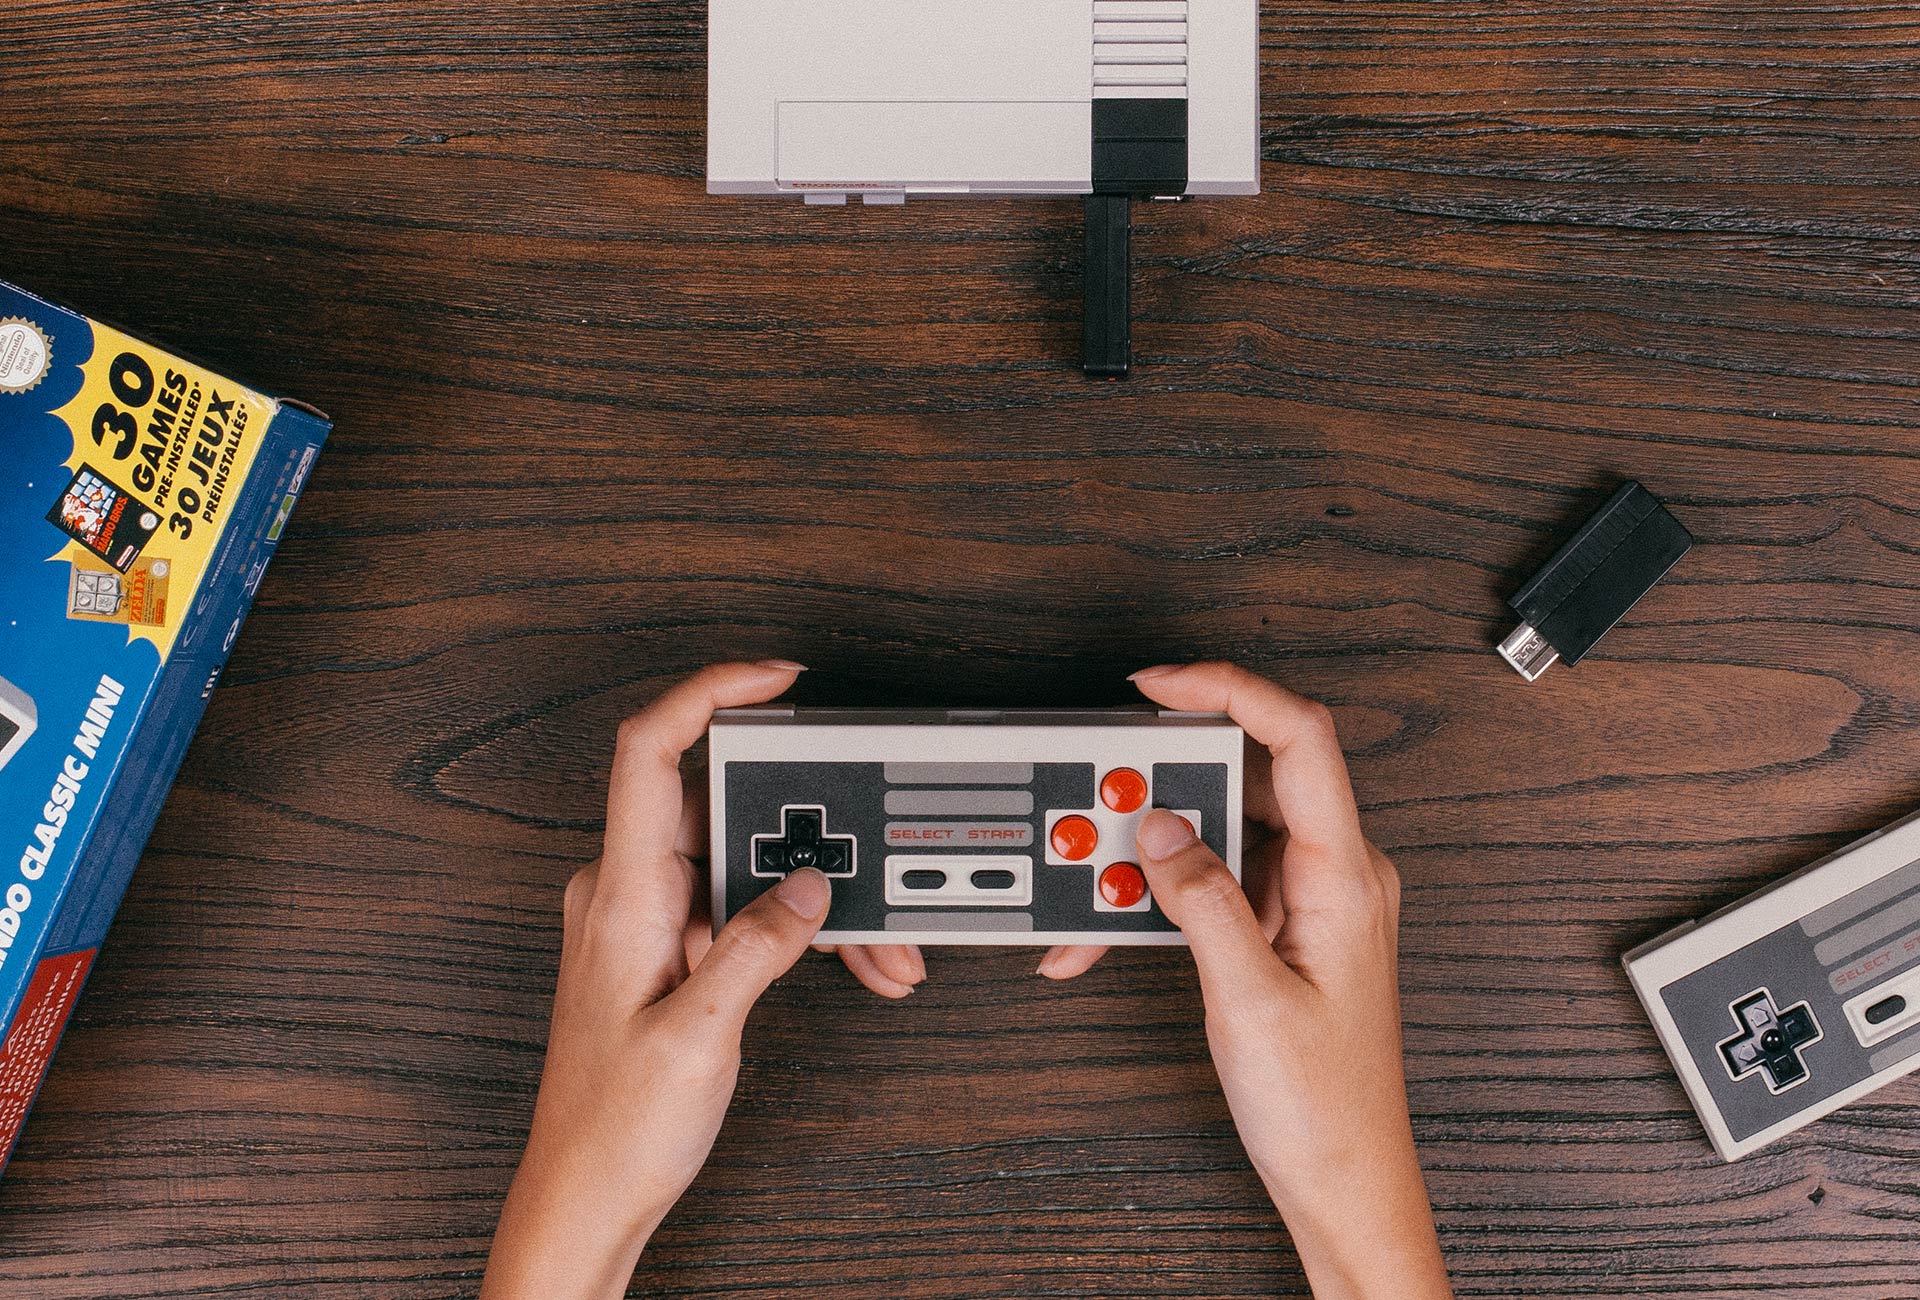 nes classic controller for switch